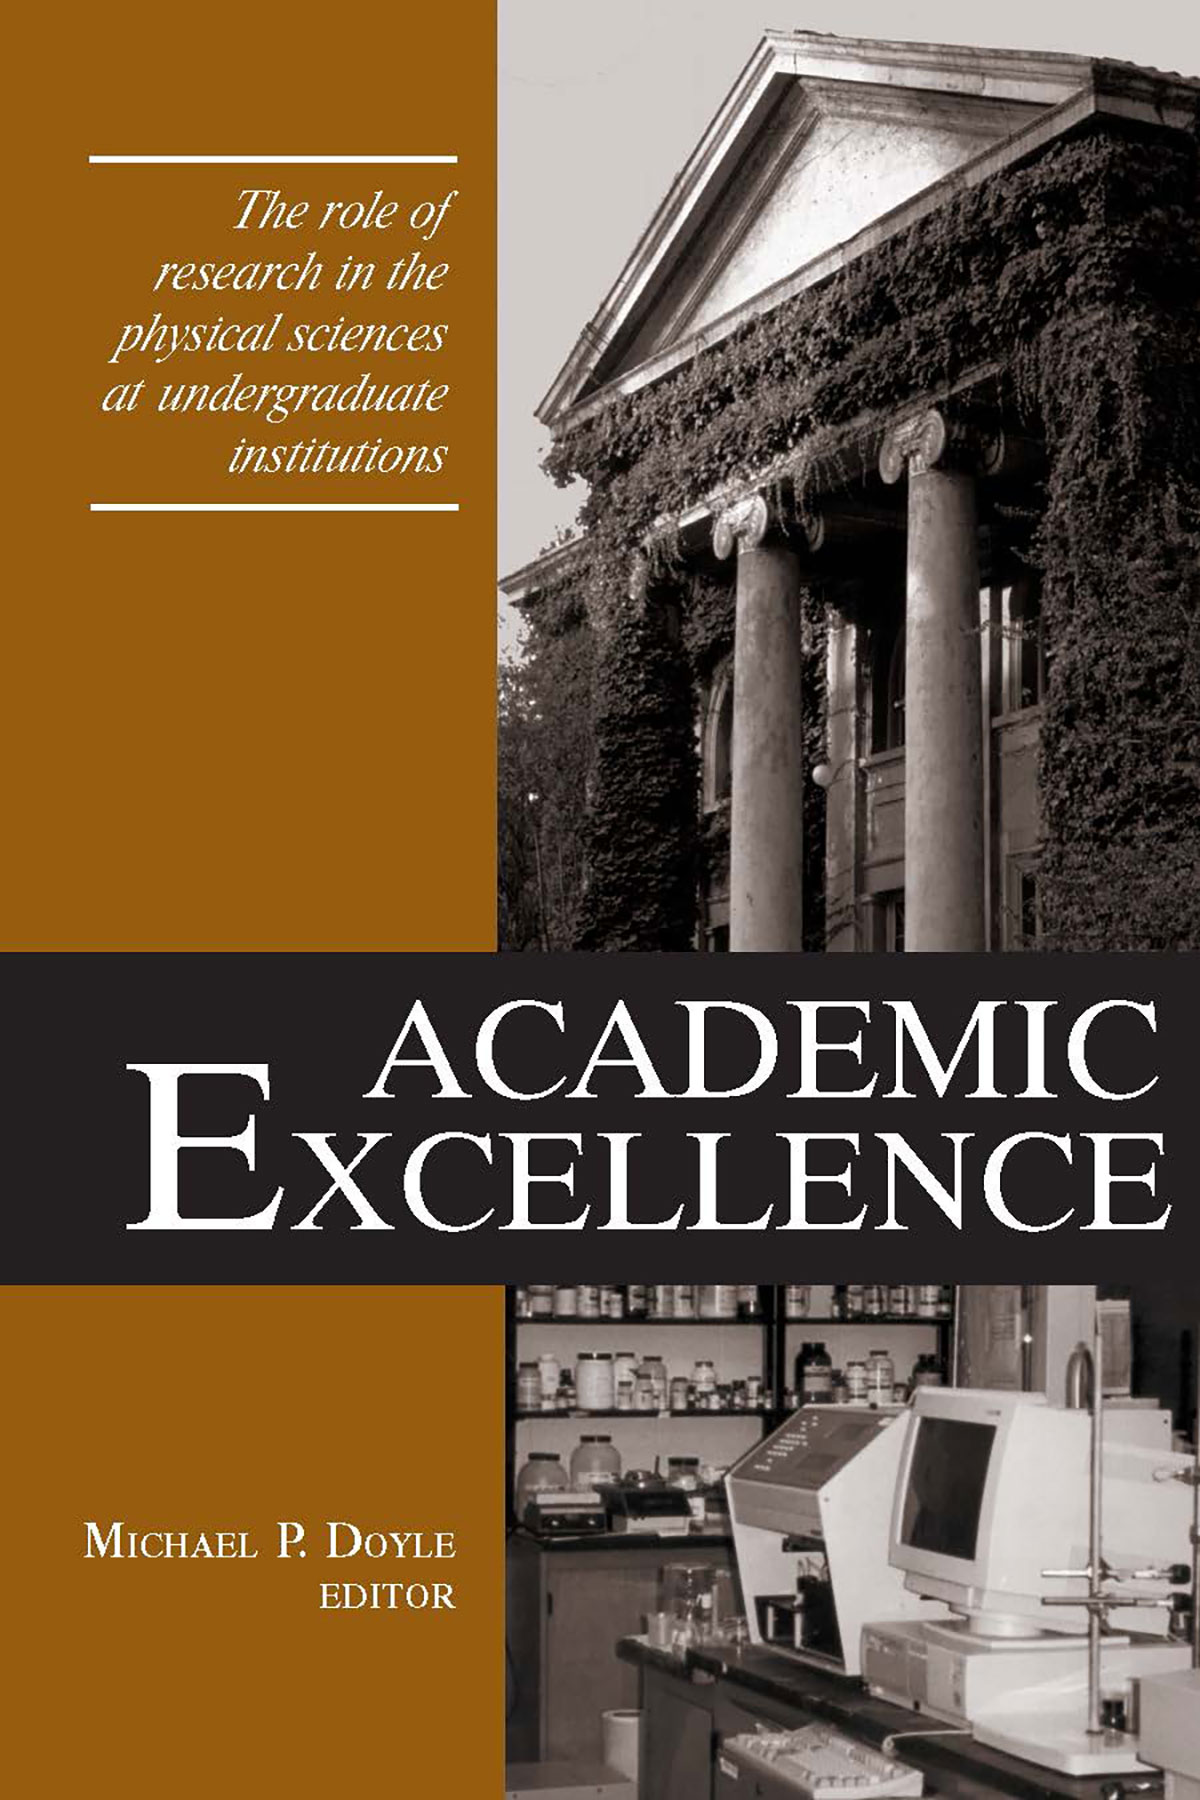 Academic Excellence: The Role of Research in the Physical Sciences at Undergraduate Institutions